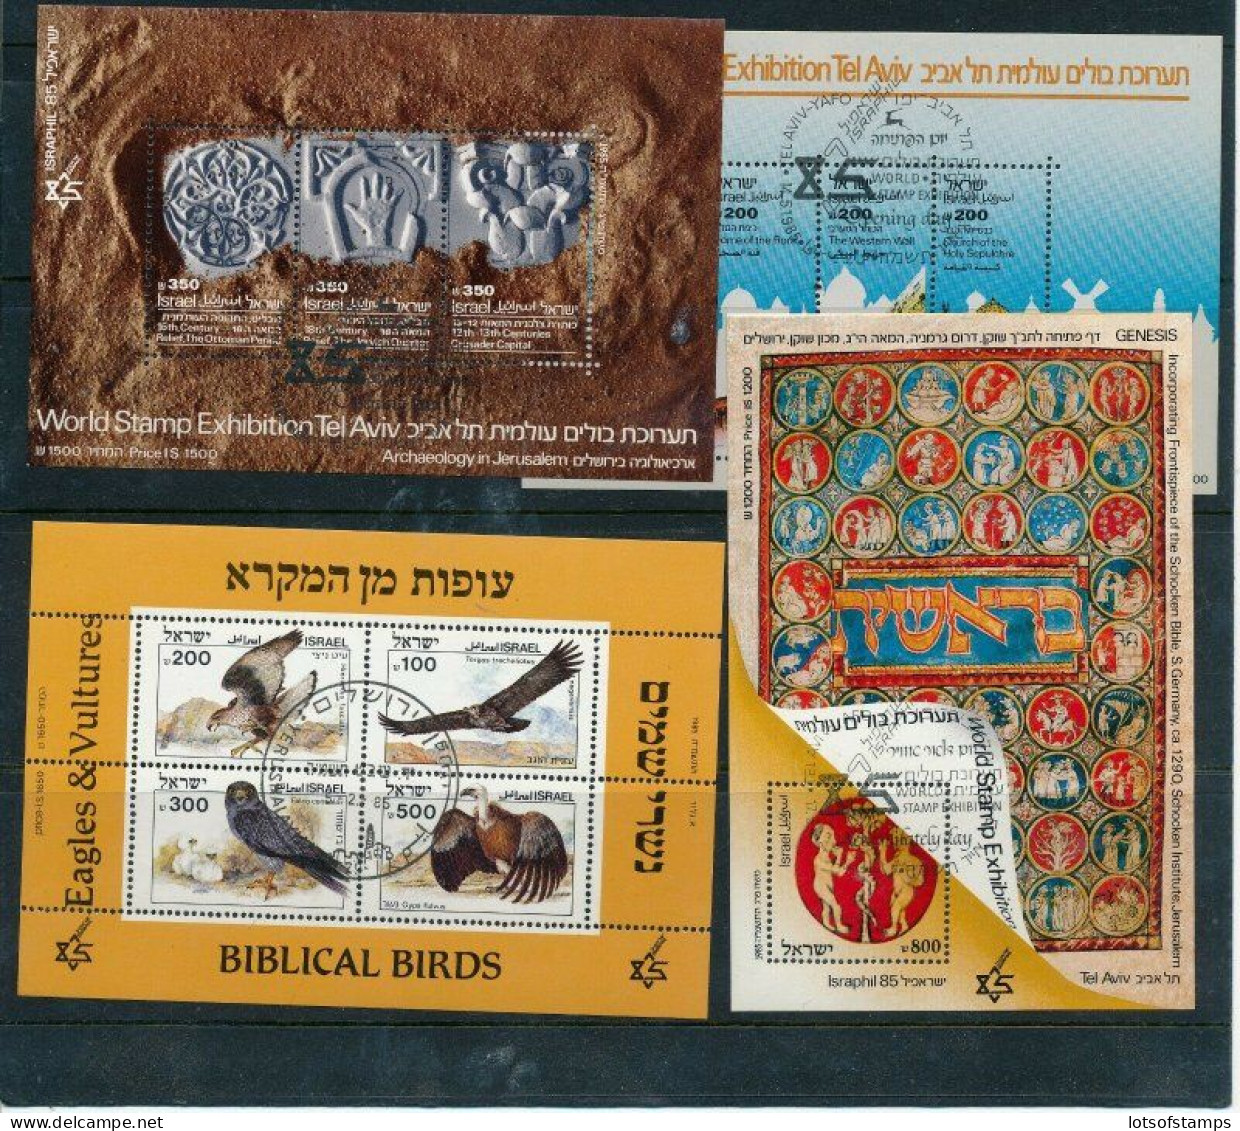 Israel 1985 Year Set Full Tabs VF WITH 1st Day POST MARKS FROM FDC's - Gebruikt (met Tabs)